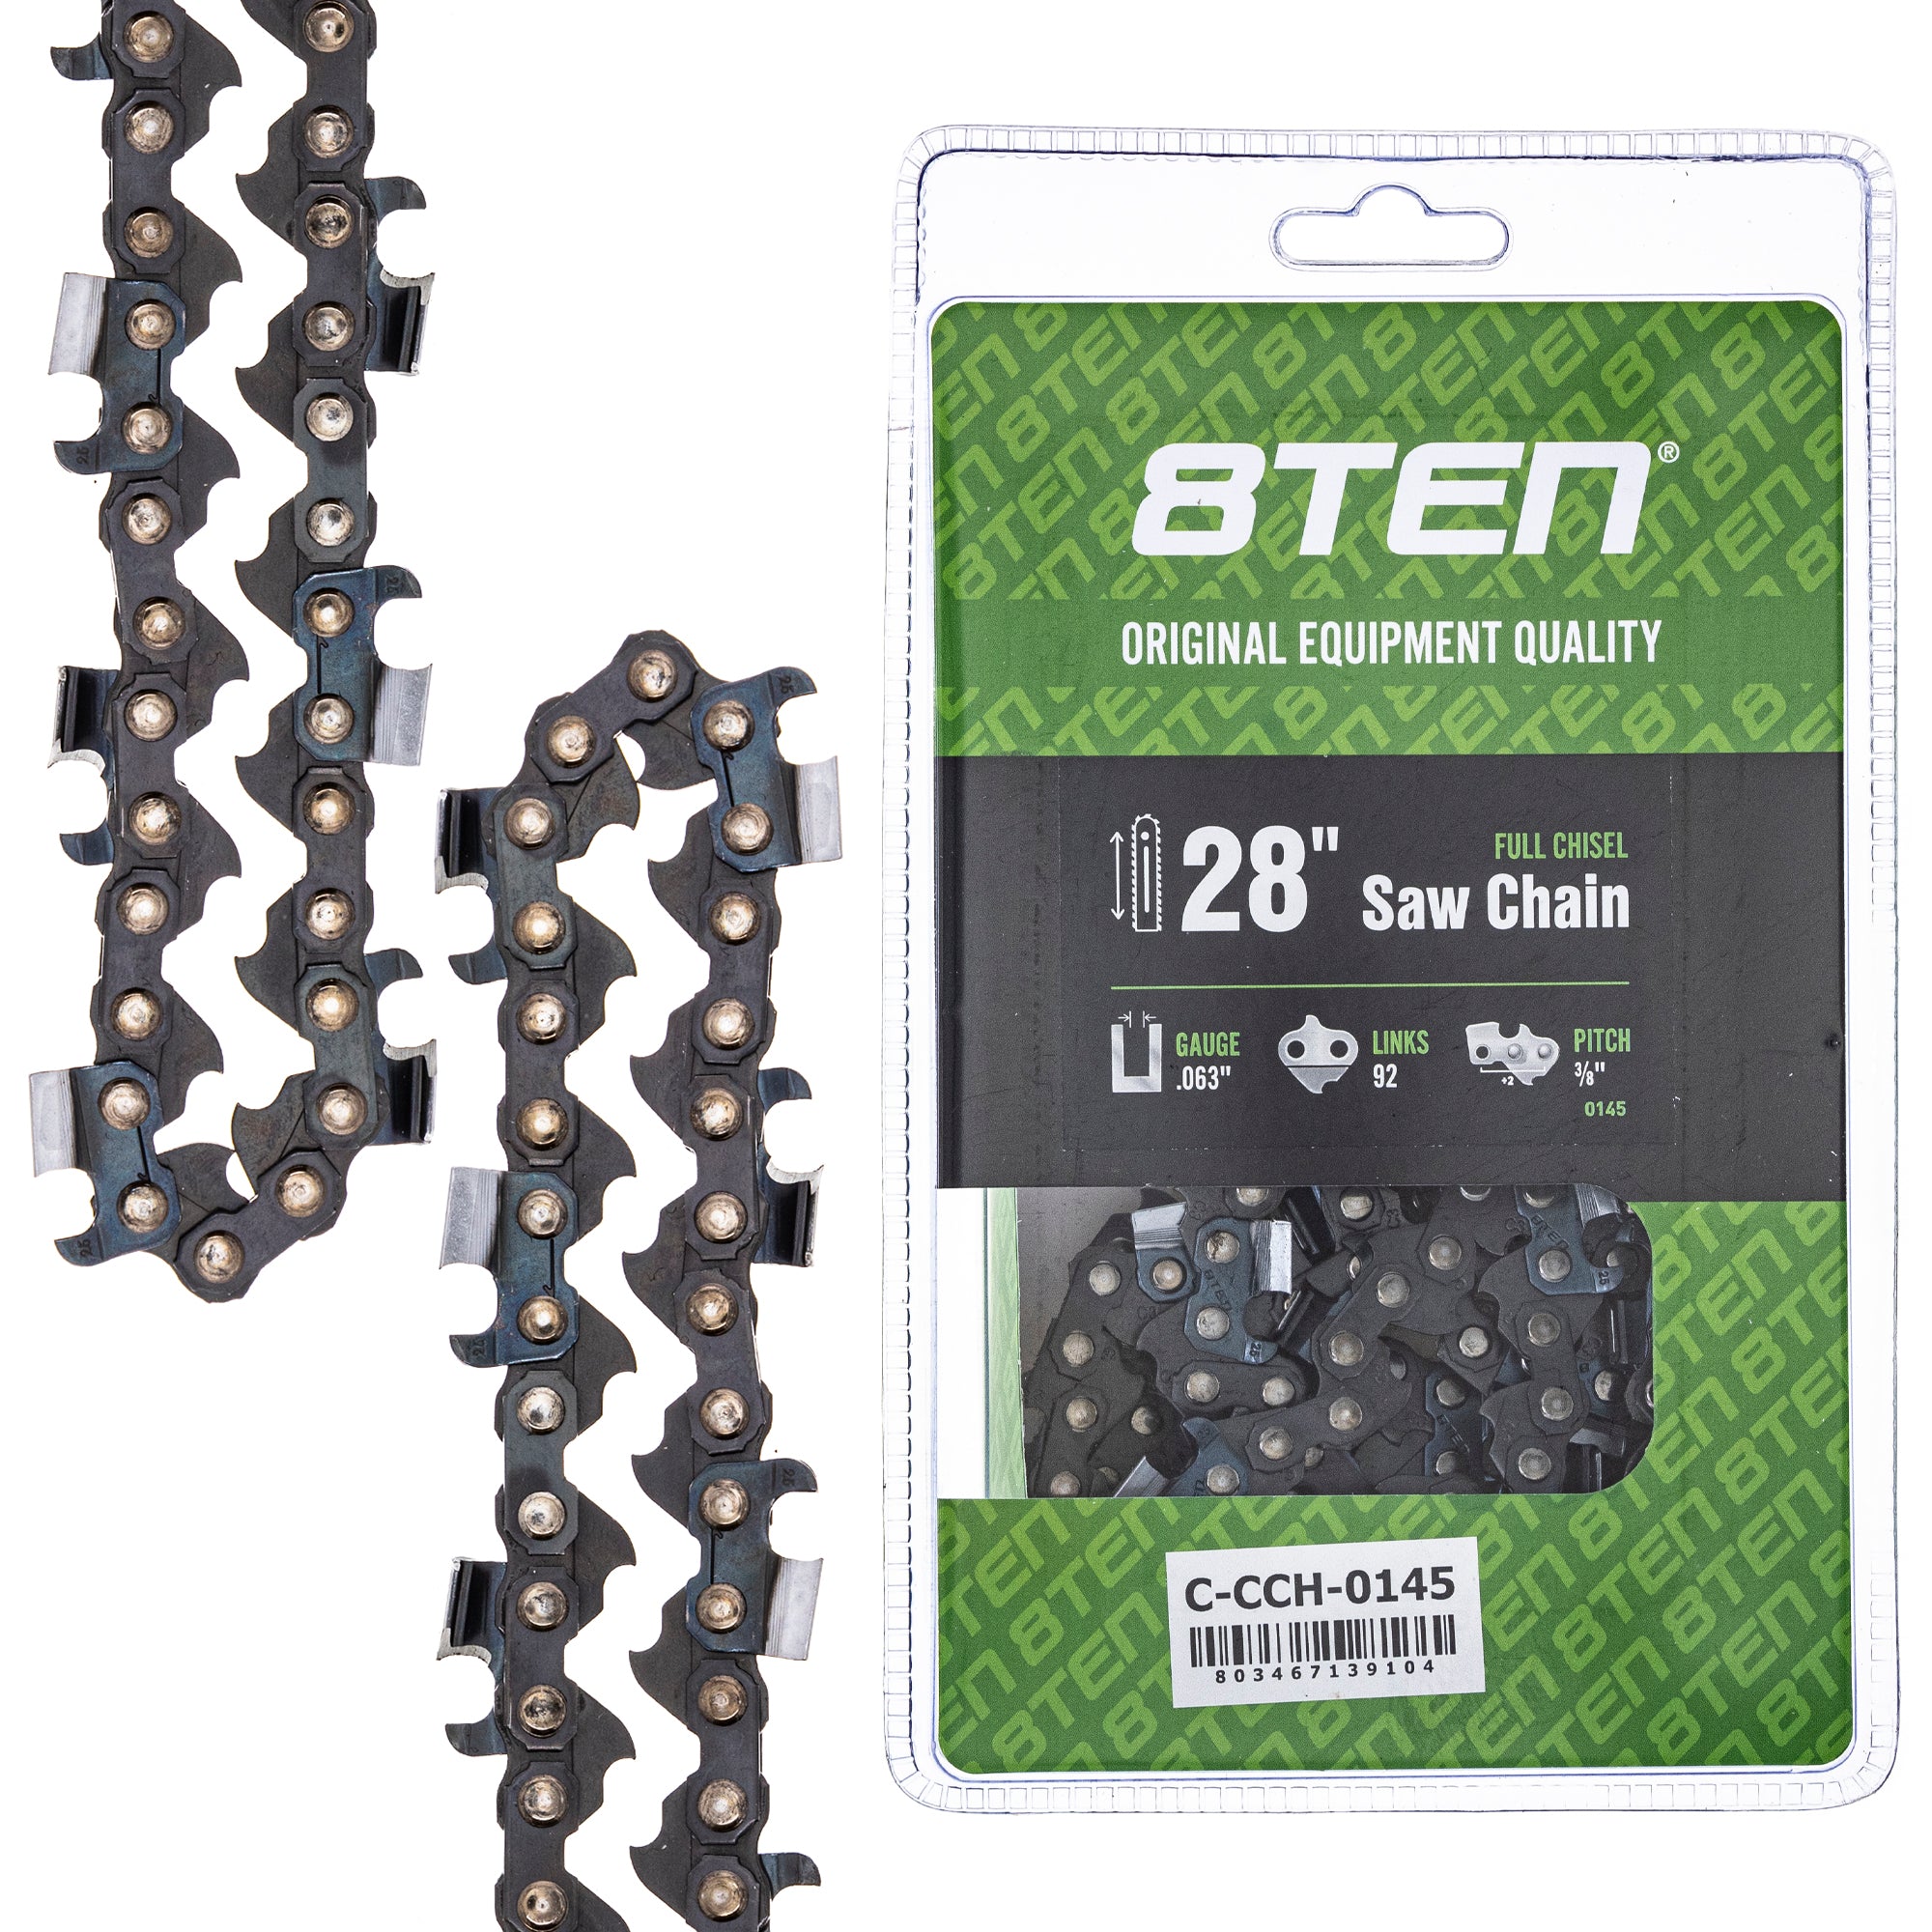 Chainsaw Chain 28 Inch .063 3/8 92DL for zOTHER MS 066 064 056 8TEN 810-CCC2367H